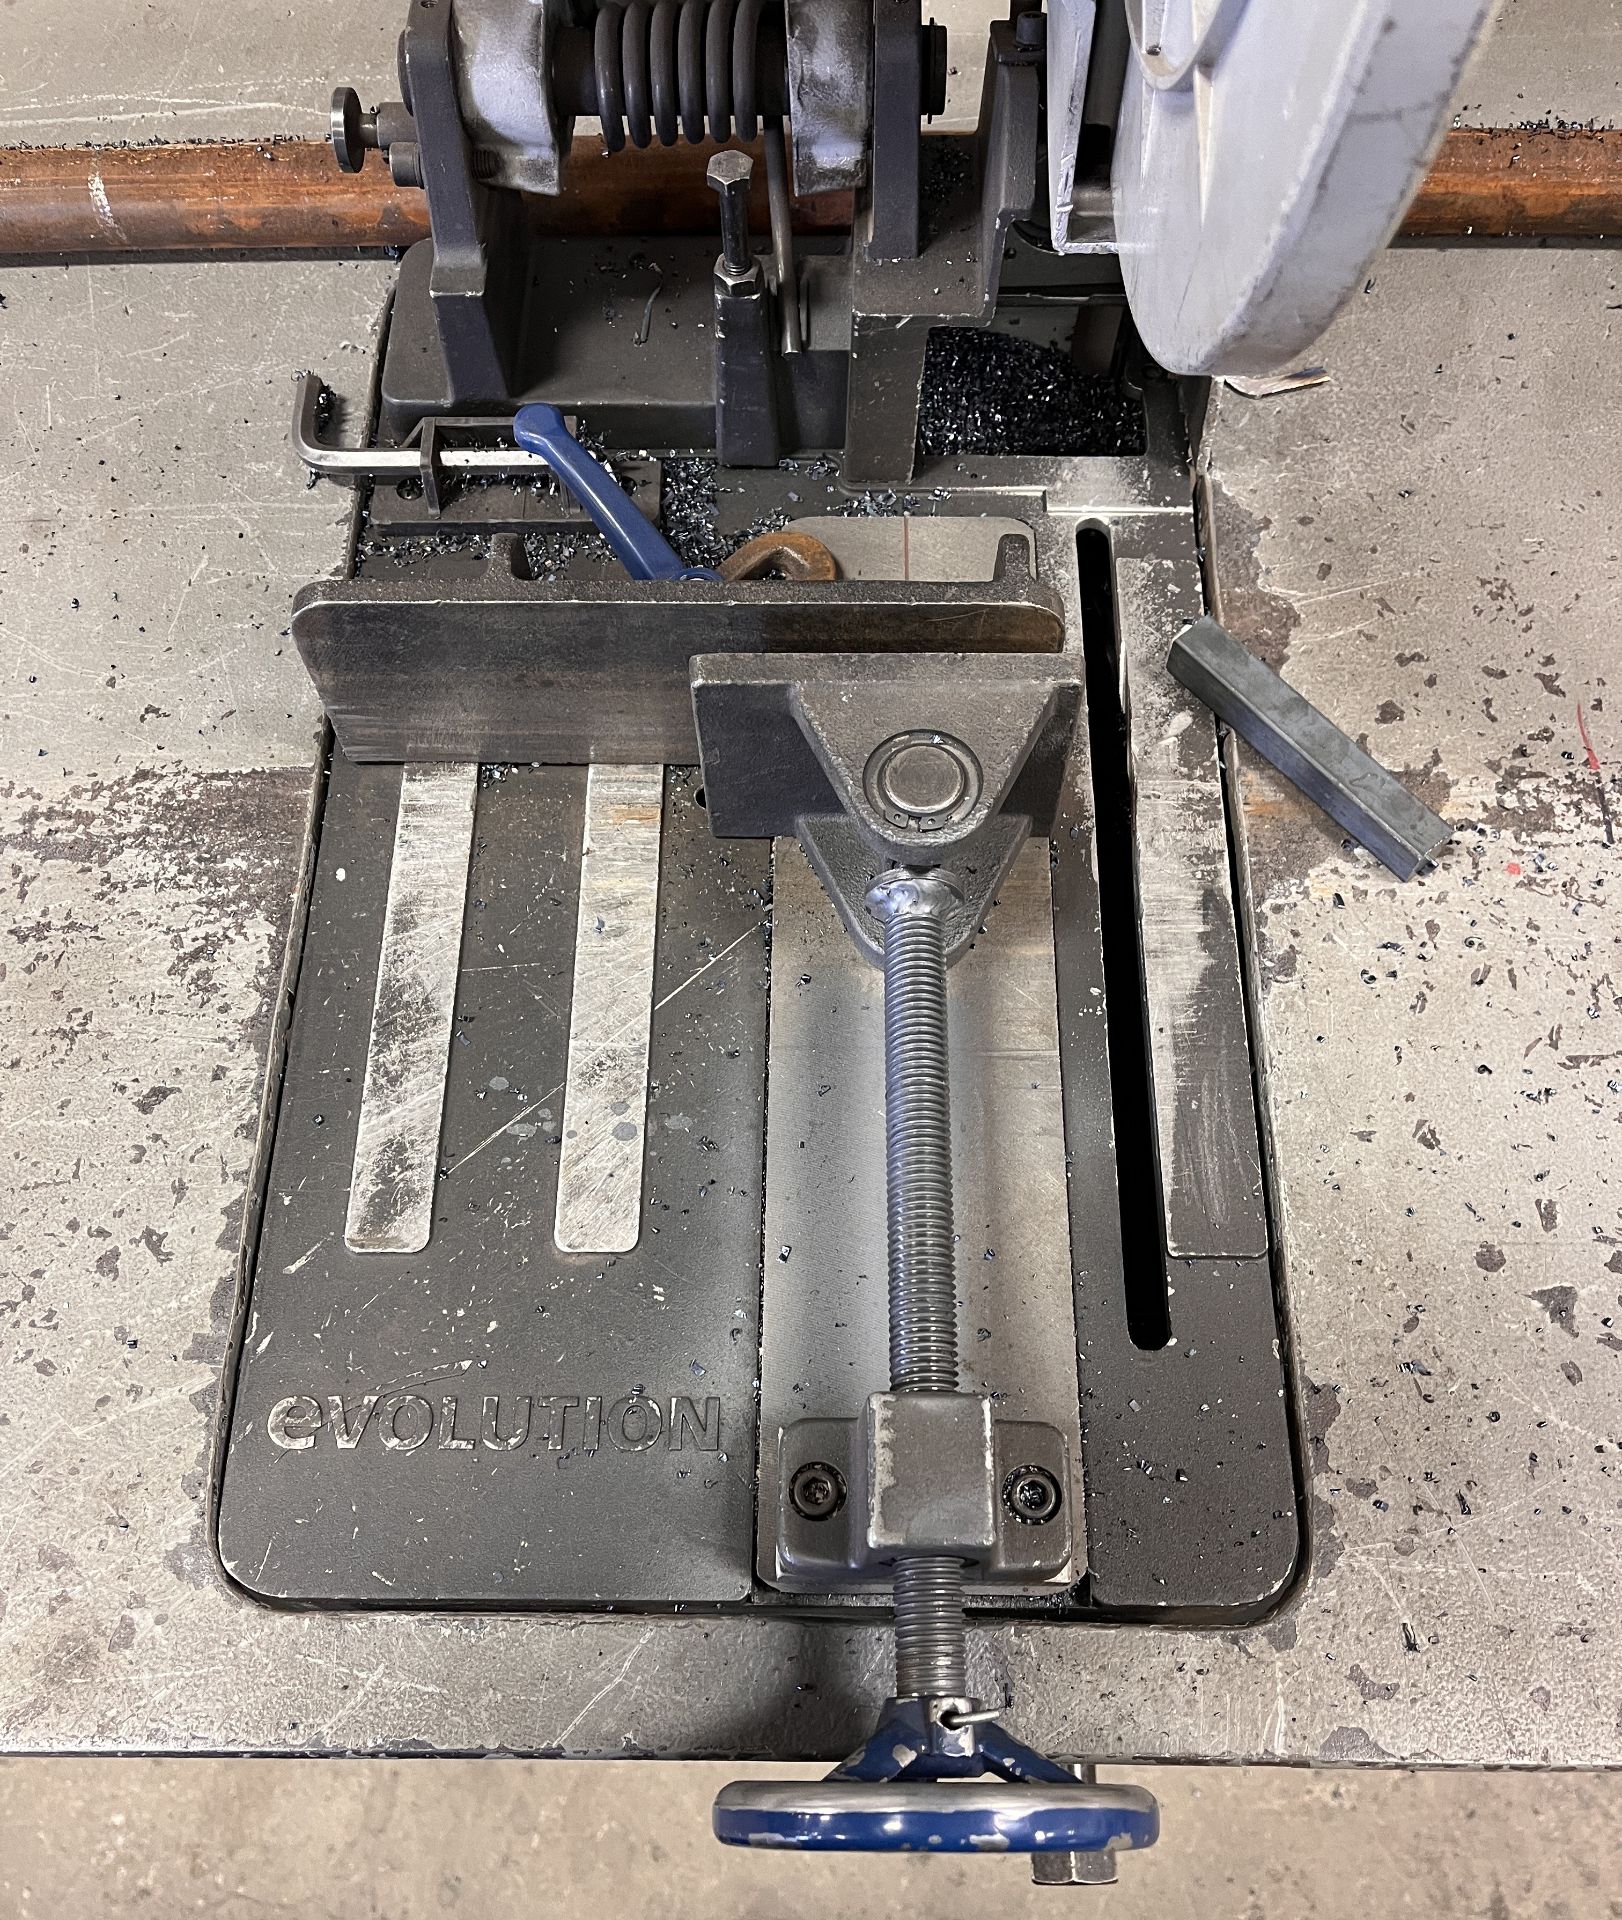 Evolution Chop Saw with Long Bench - Image 6 of 7